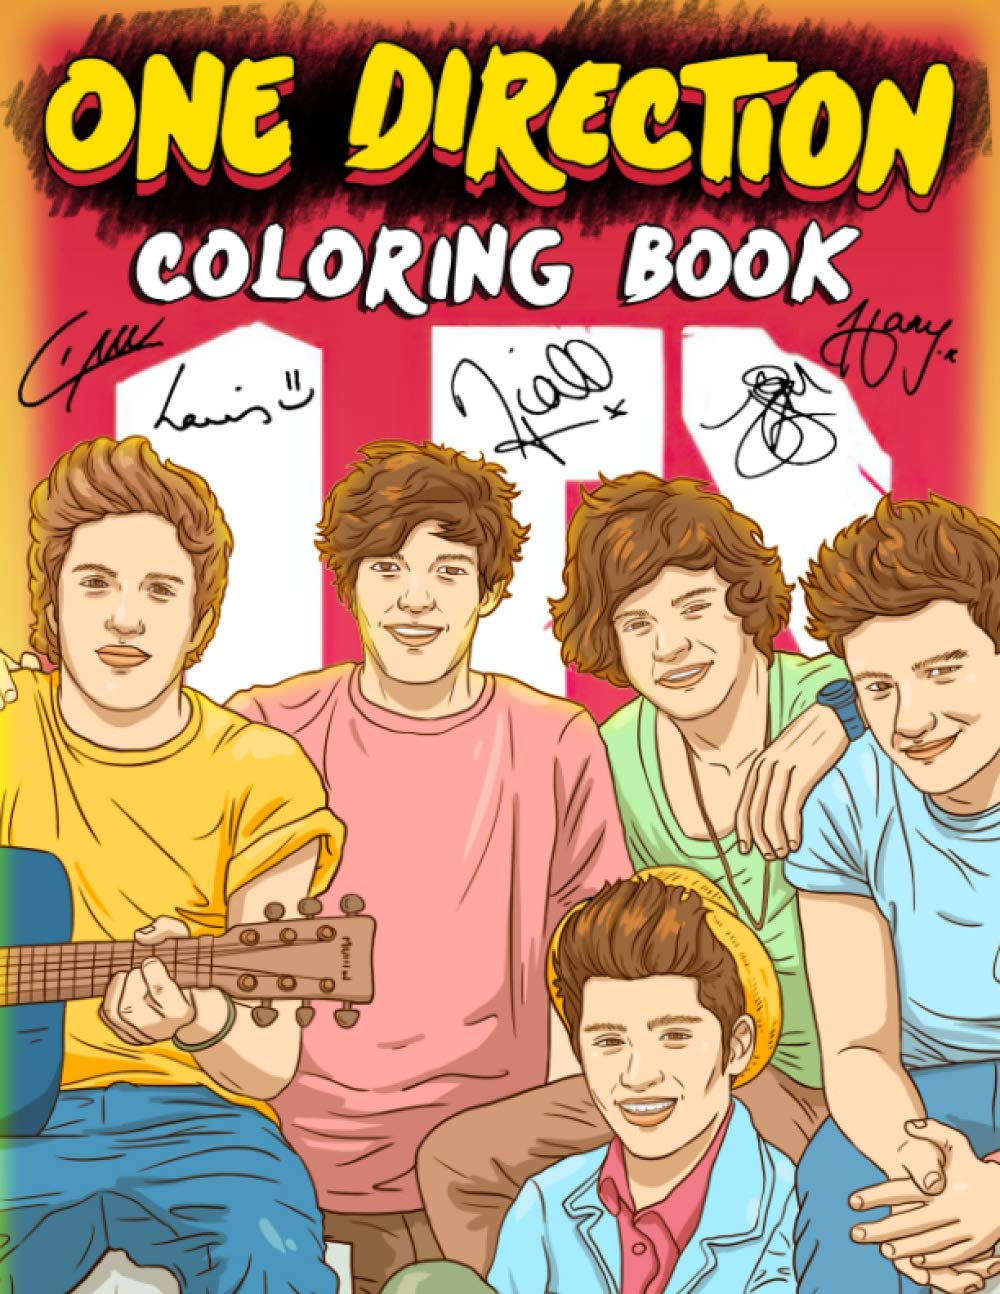 One direction coloring book the book promotes your brain enhancement skills boosts your confidence your color creativity through vivid illustrations with pop boy band by samuel lombardo